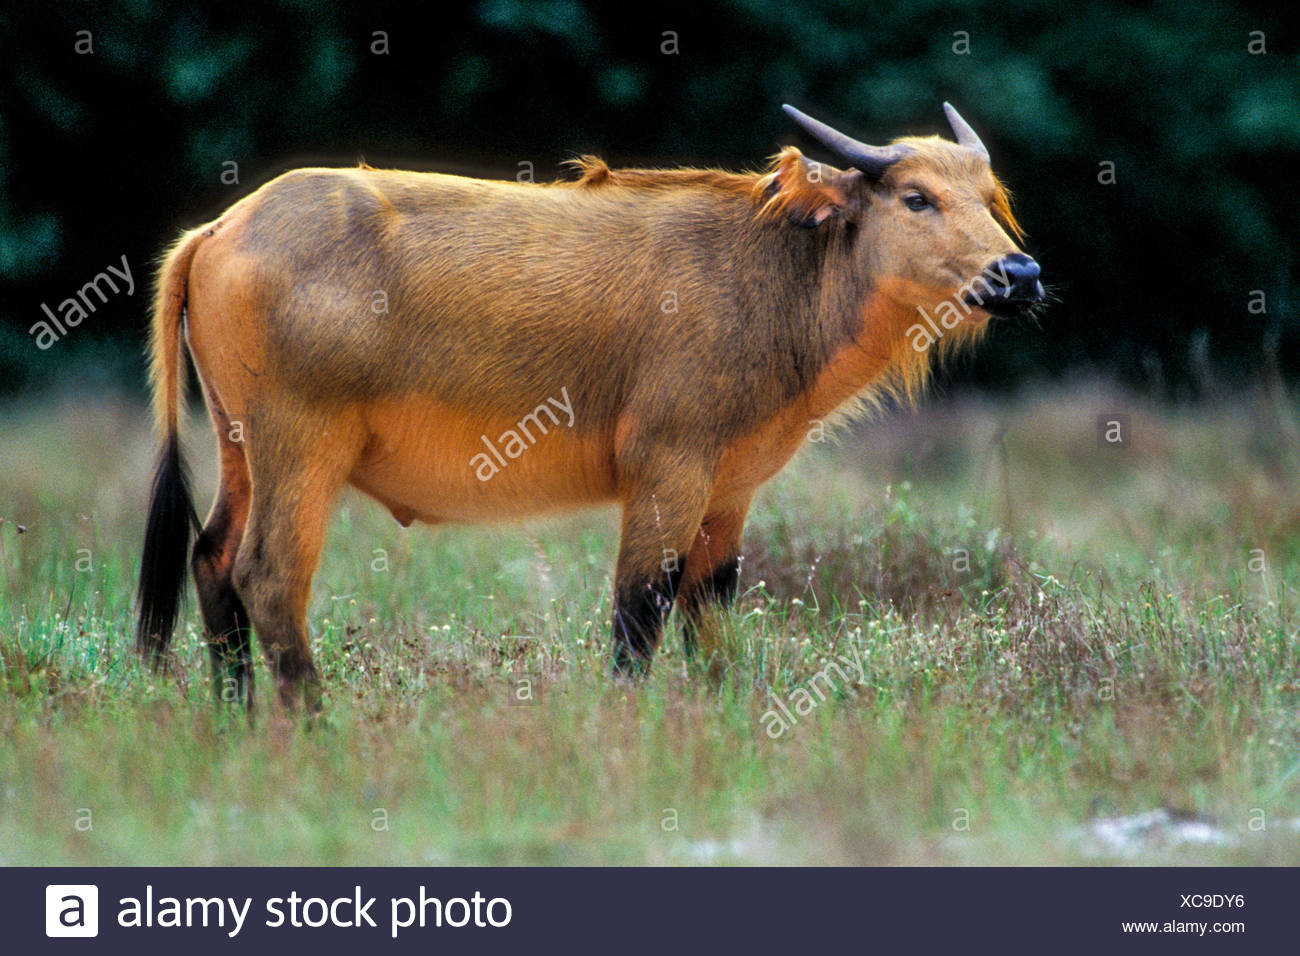 An African Forest Buffalo, Syncerus Caffer Nanus, In The Gamba Region Of  Gabon, Africa Stock Photo - Alamy